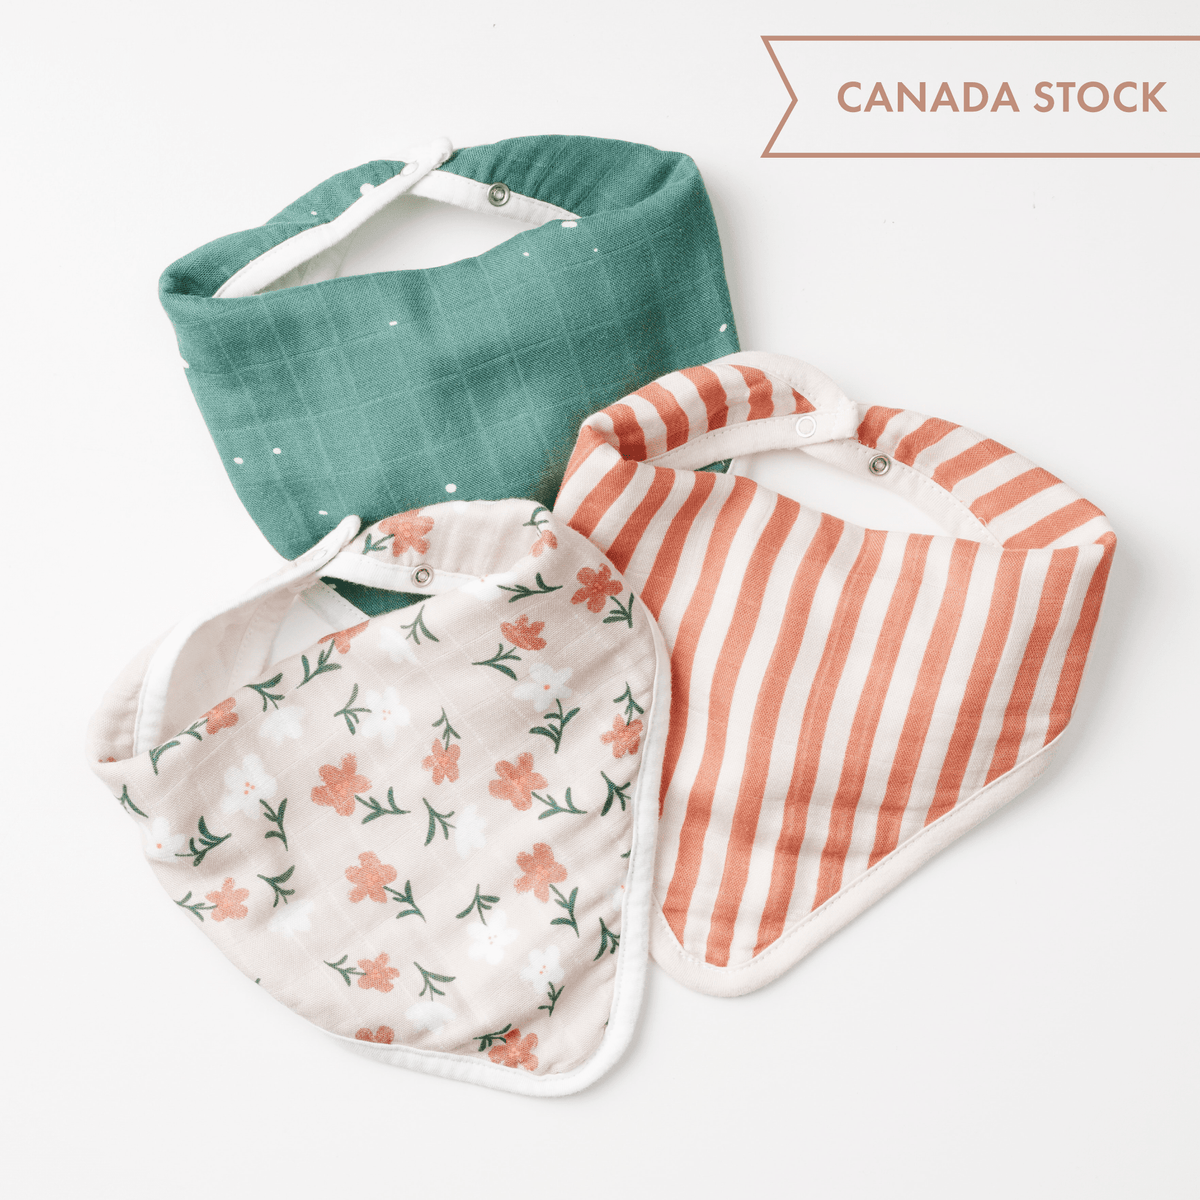 Bandana Bibs - Pack of 3 - Starry/Floral/Stripes - Canada Stock